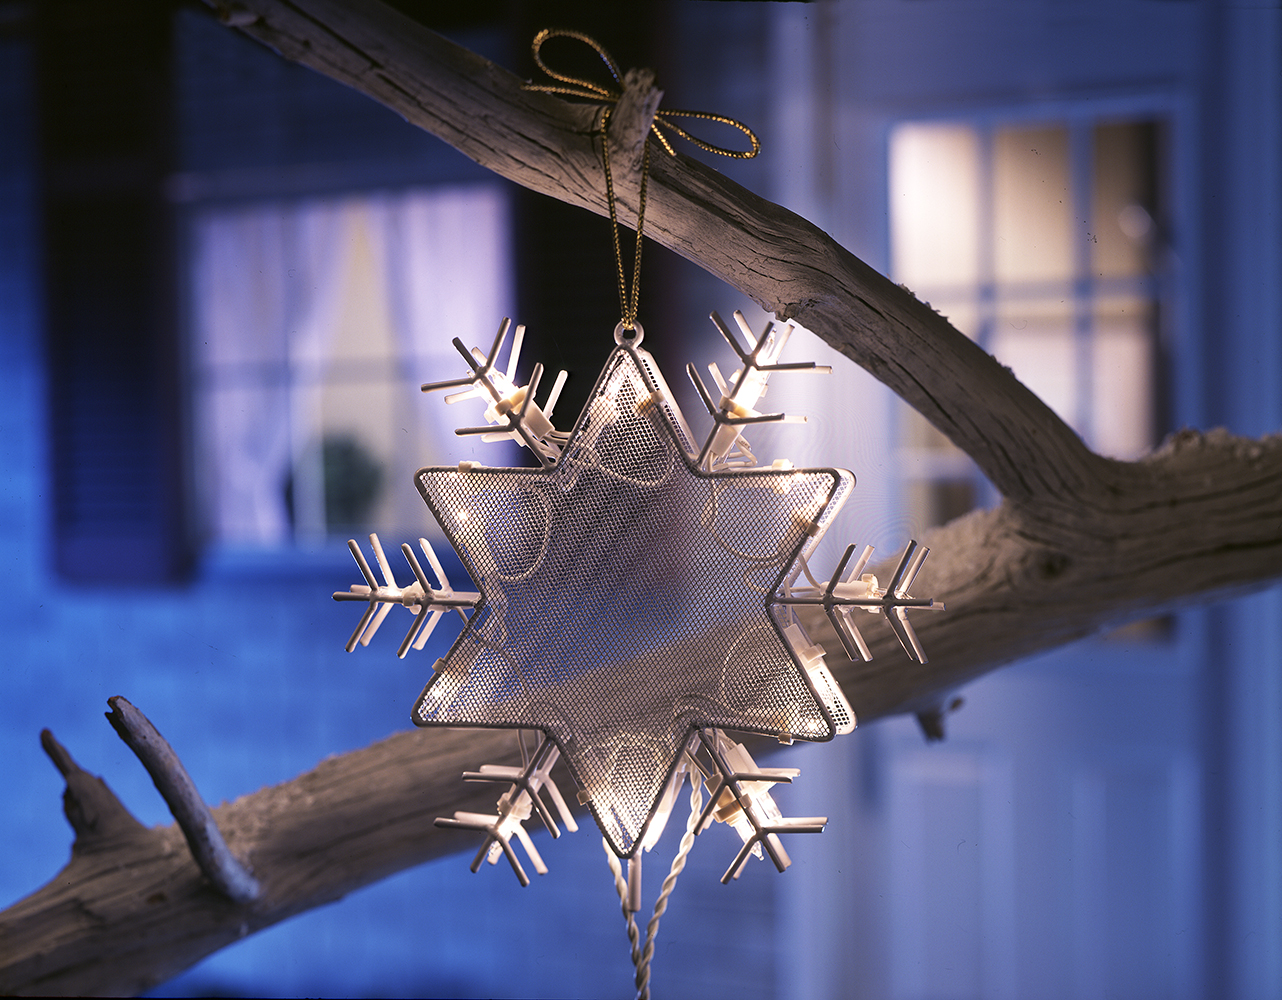 Snow flake light up display on tree branch in front of blue lit house front